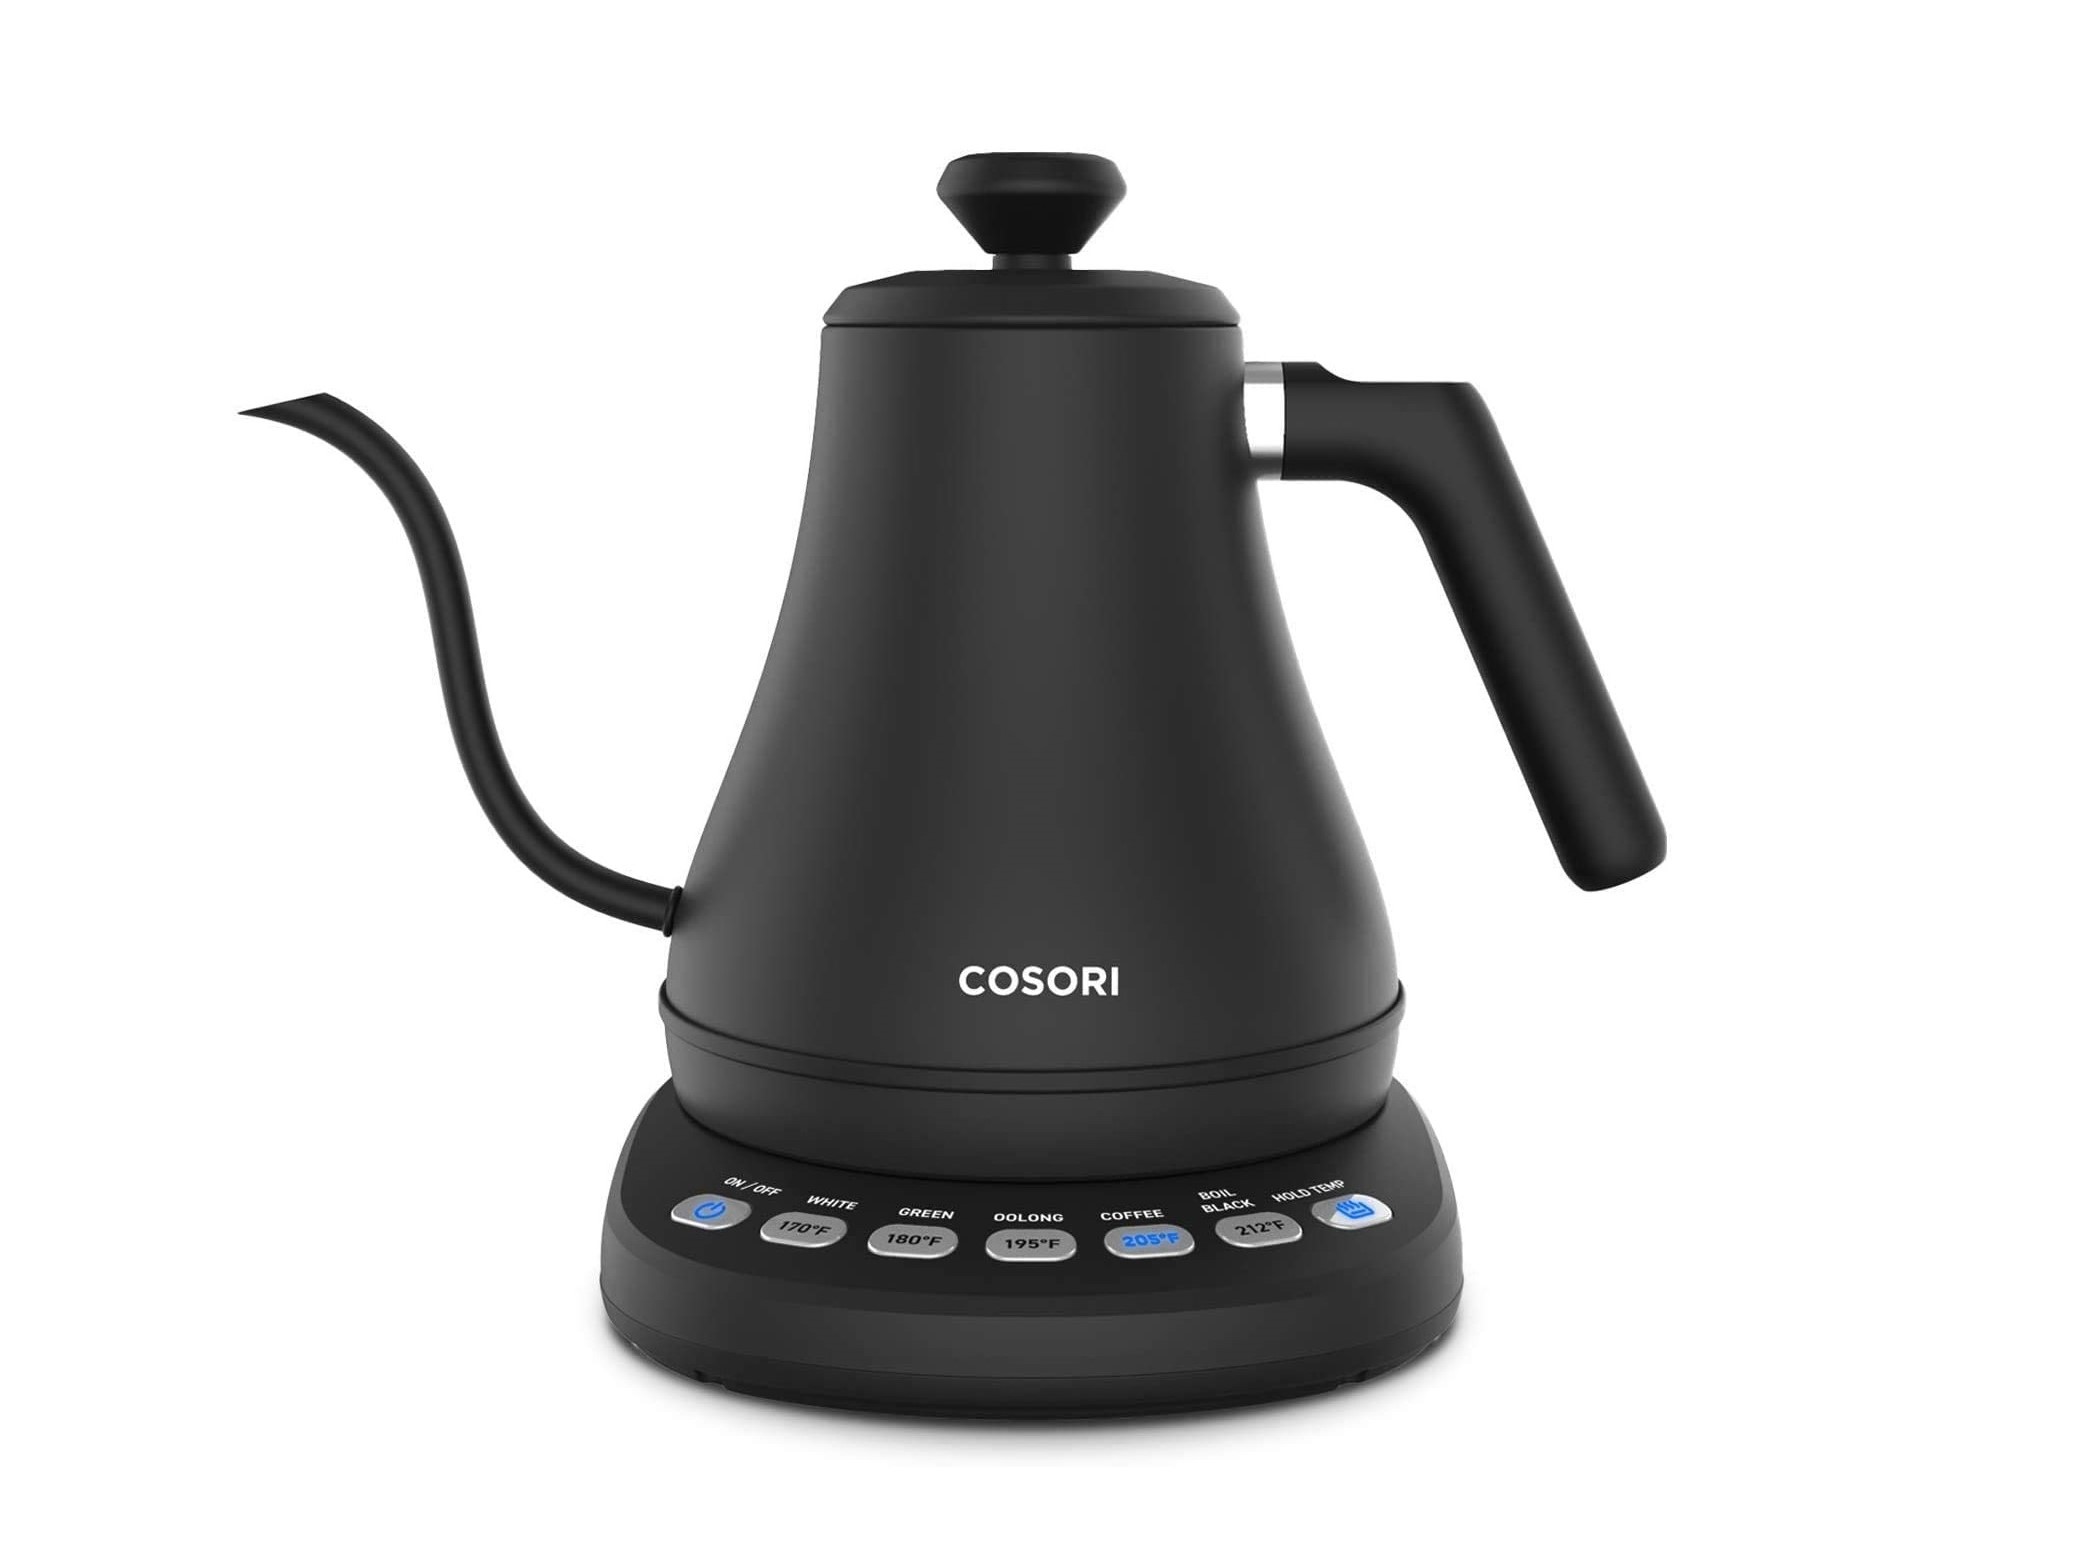 https://www.themanual.com/wp-content/uploads/sites/9/2022/07/Cosori-Electric-Gooseneck-Kettle-product-image.jpg?p=1